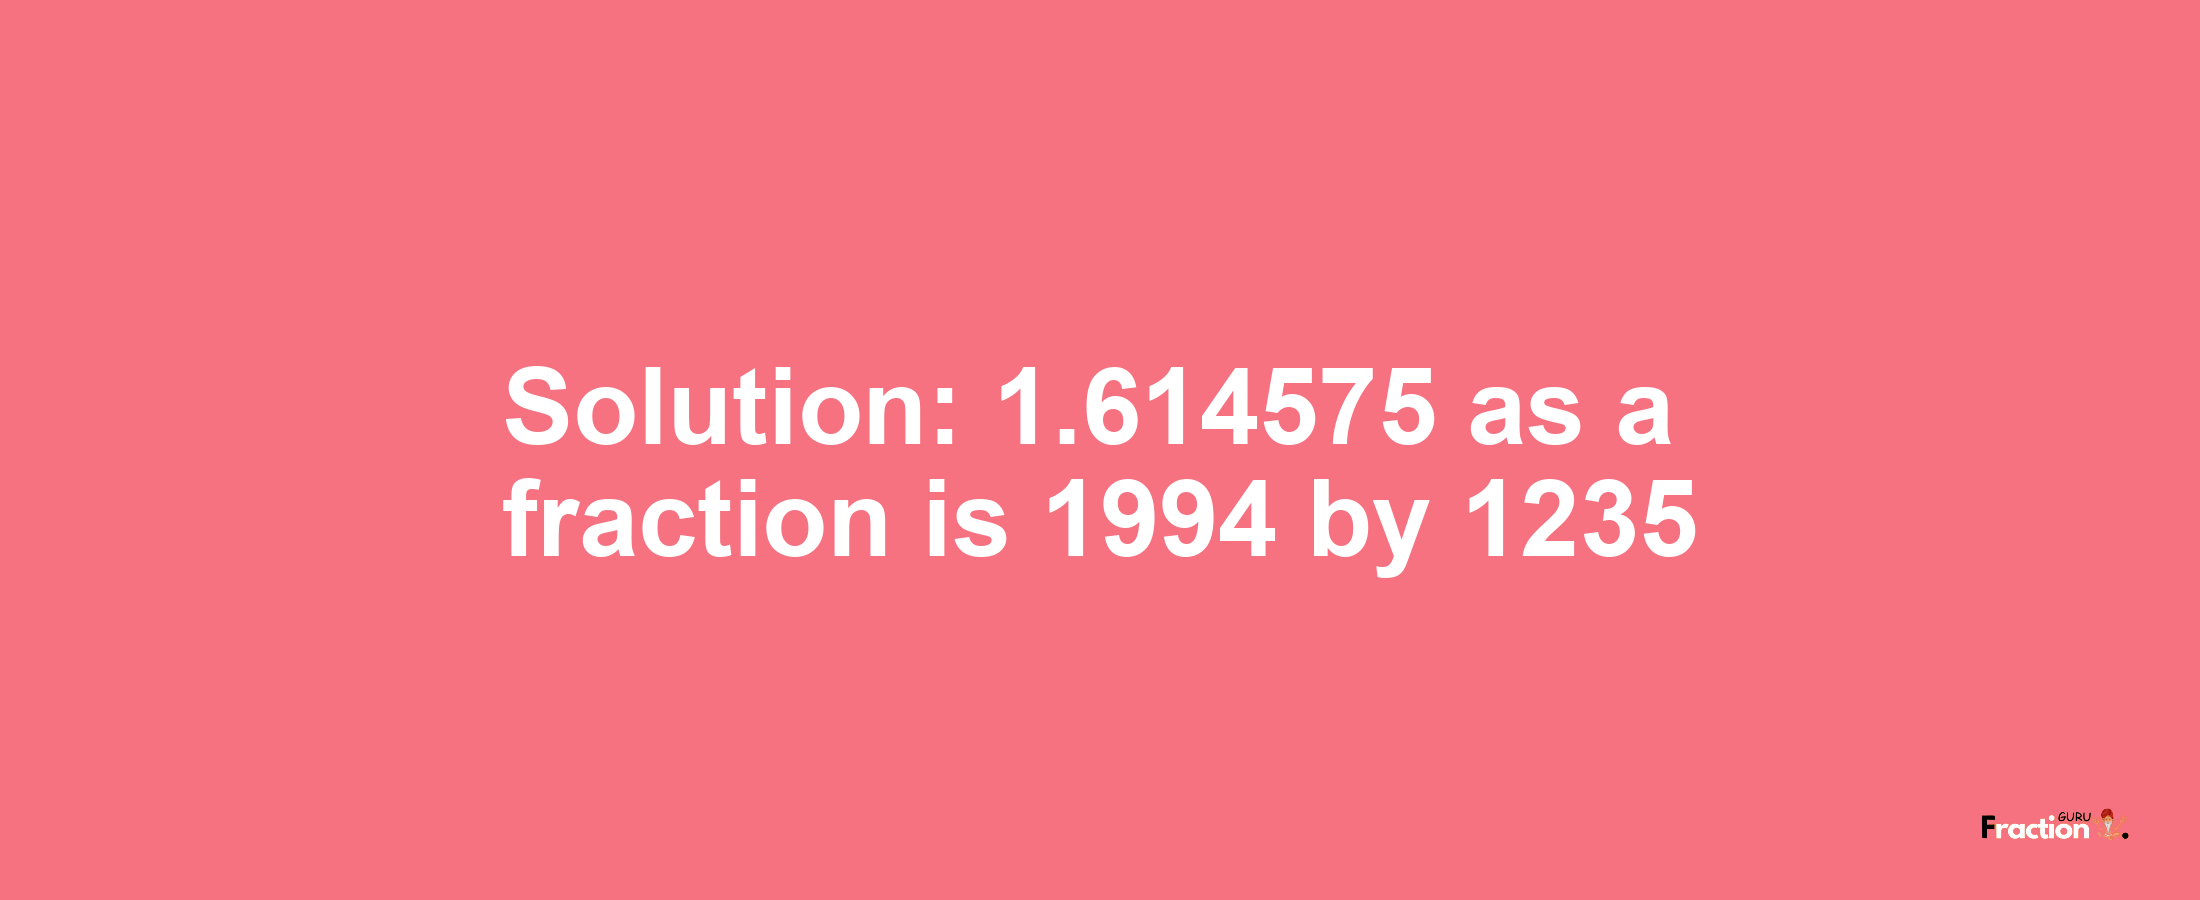 Solution:1.614575 as a fraction is 1994/1235